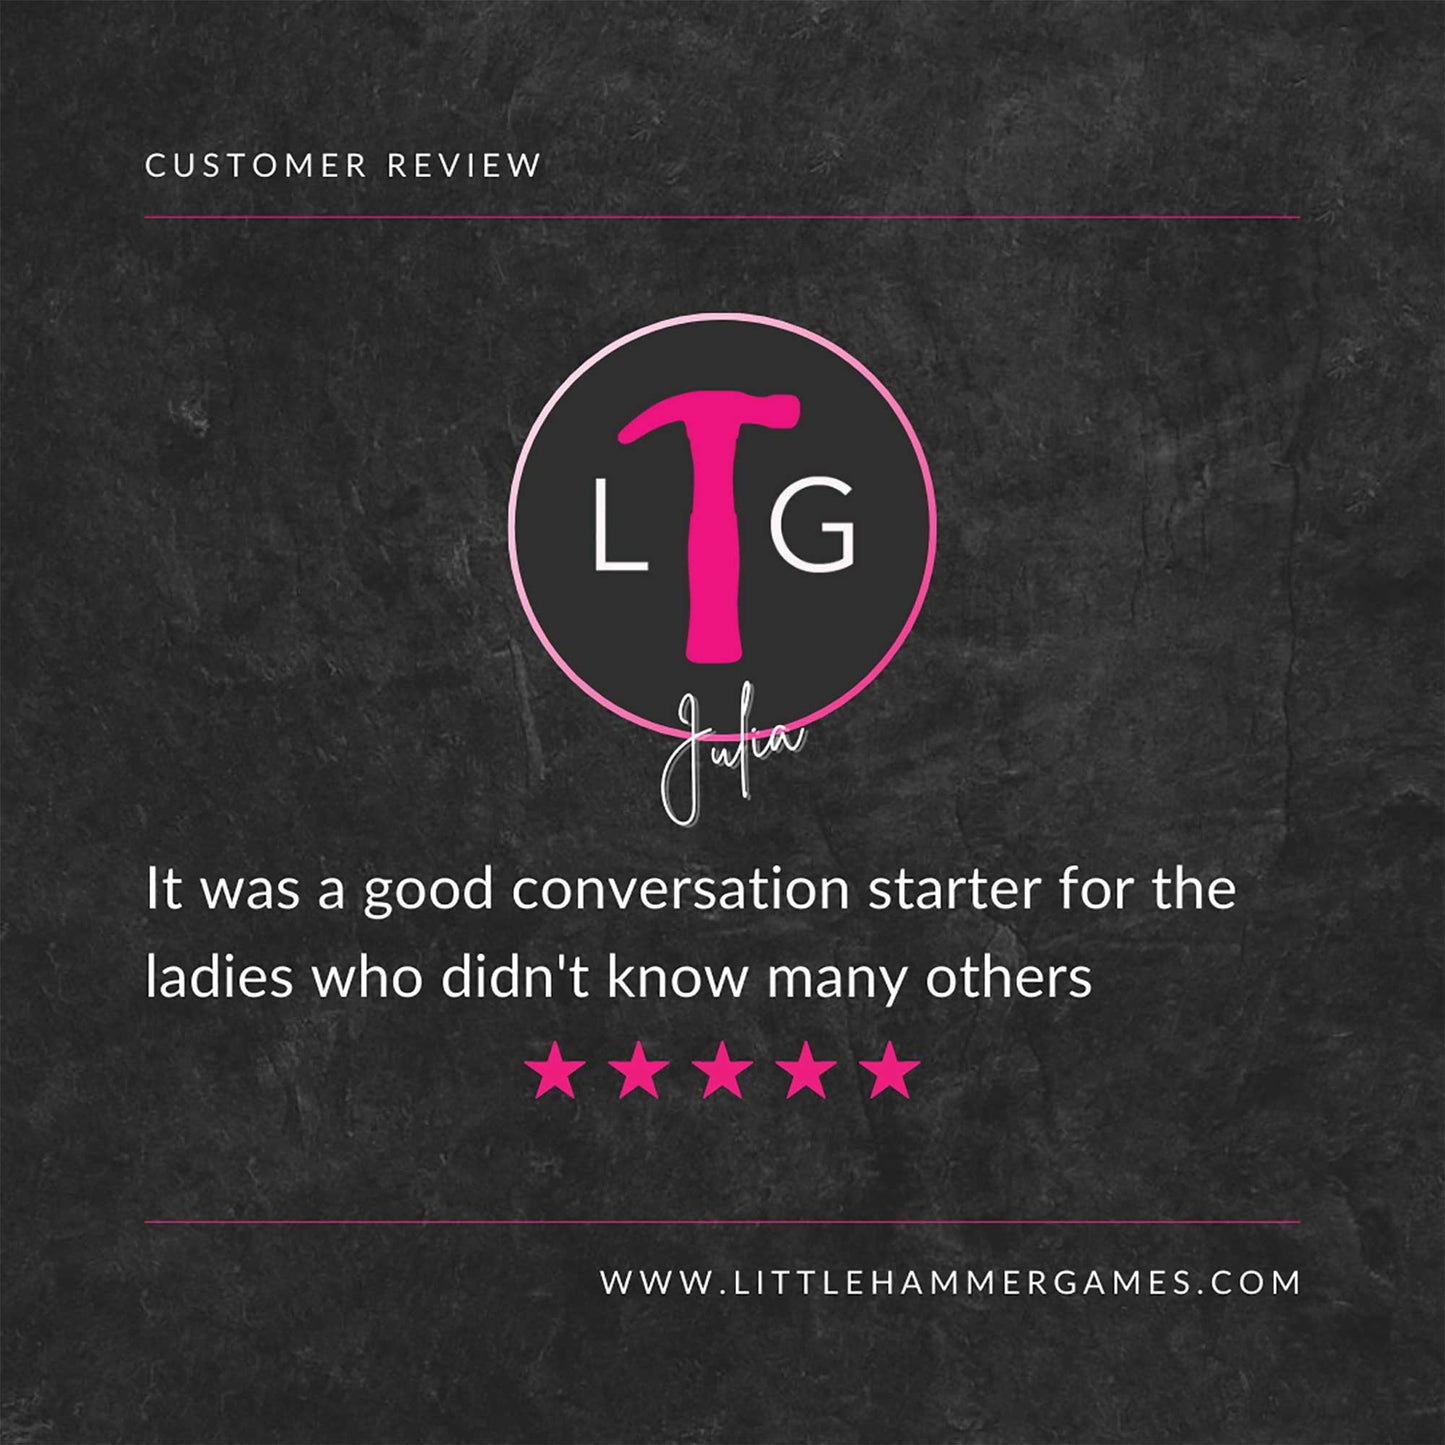 White and pink text on a slate background with a 5-star review that says "It was a good conversation starter for the ladies who didn't know many others"